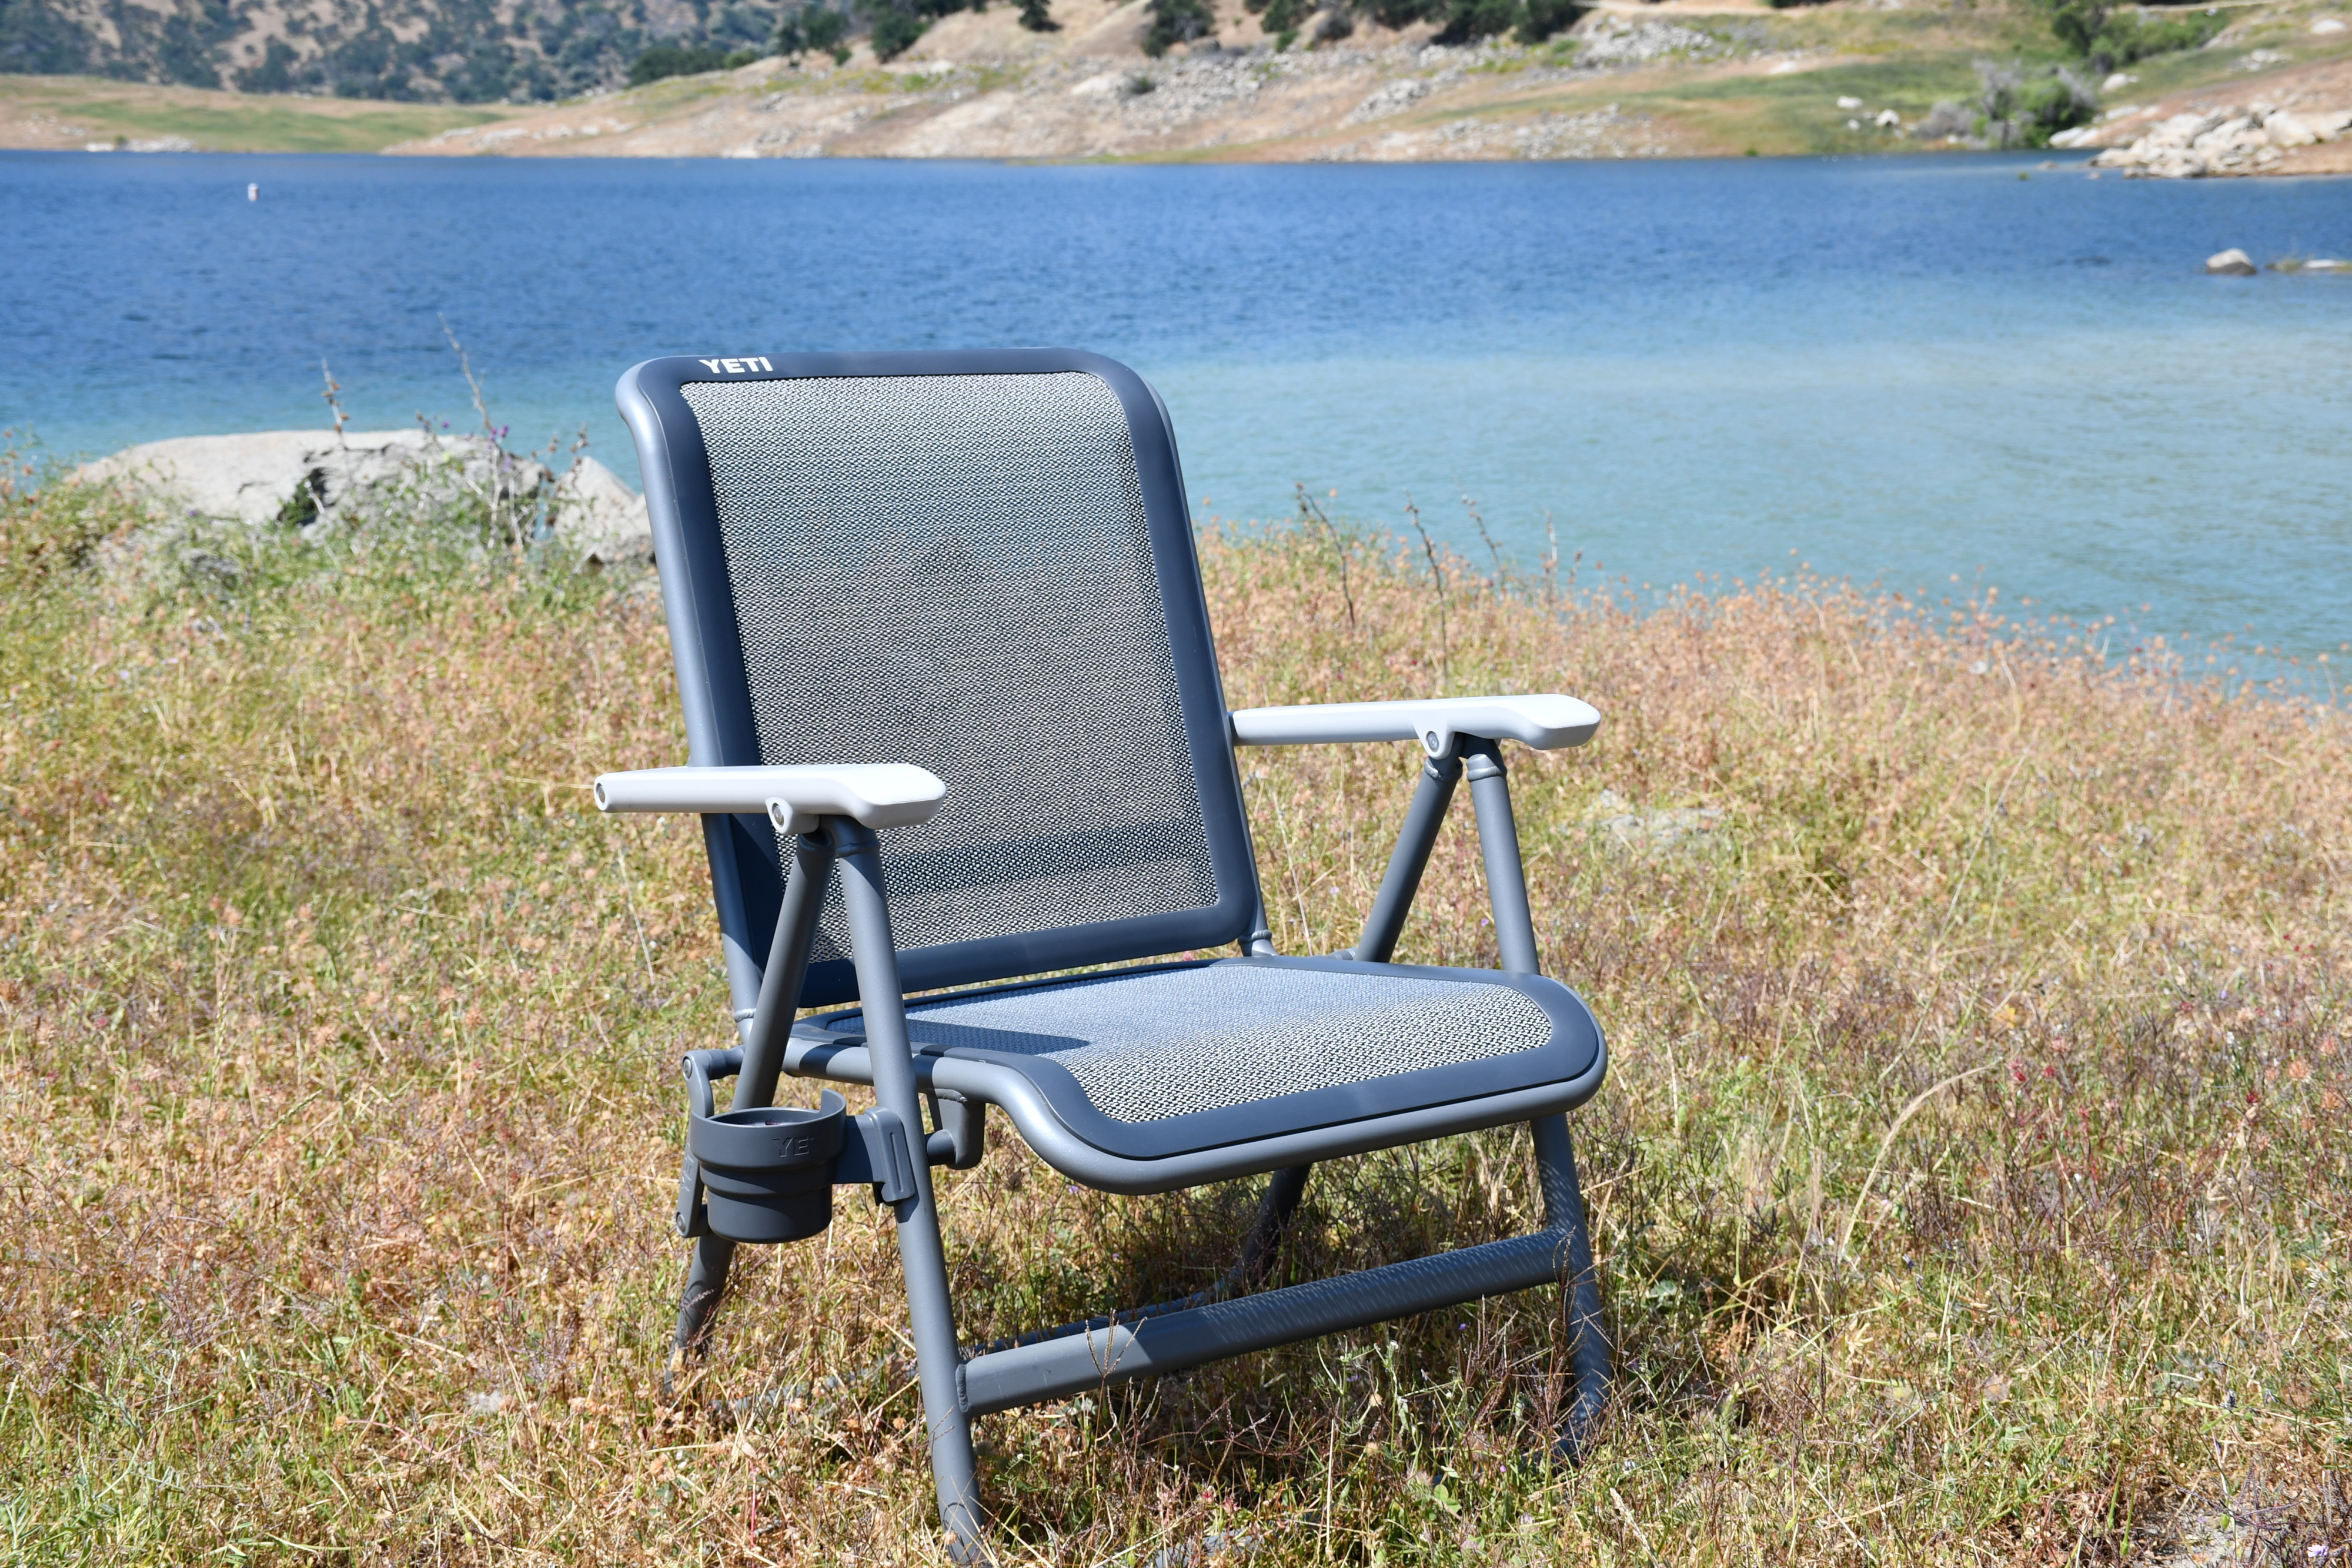 Fit for a Yeti: Hondo Basecamp Chair